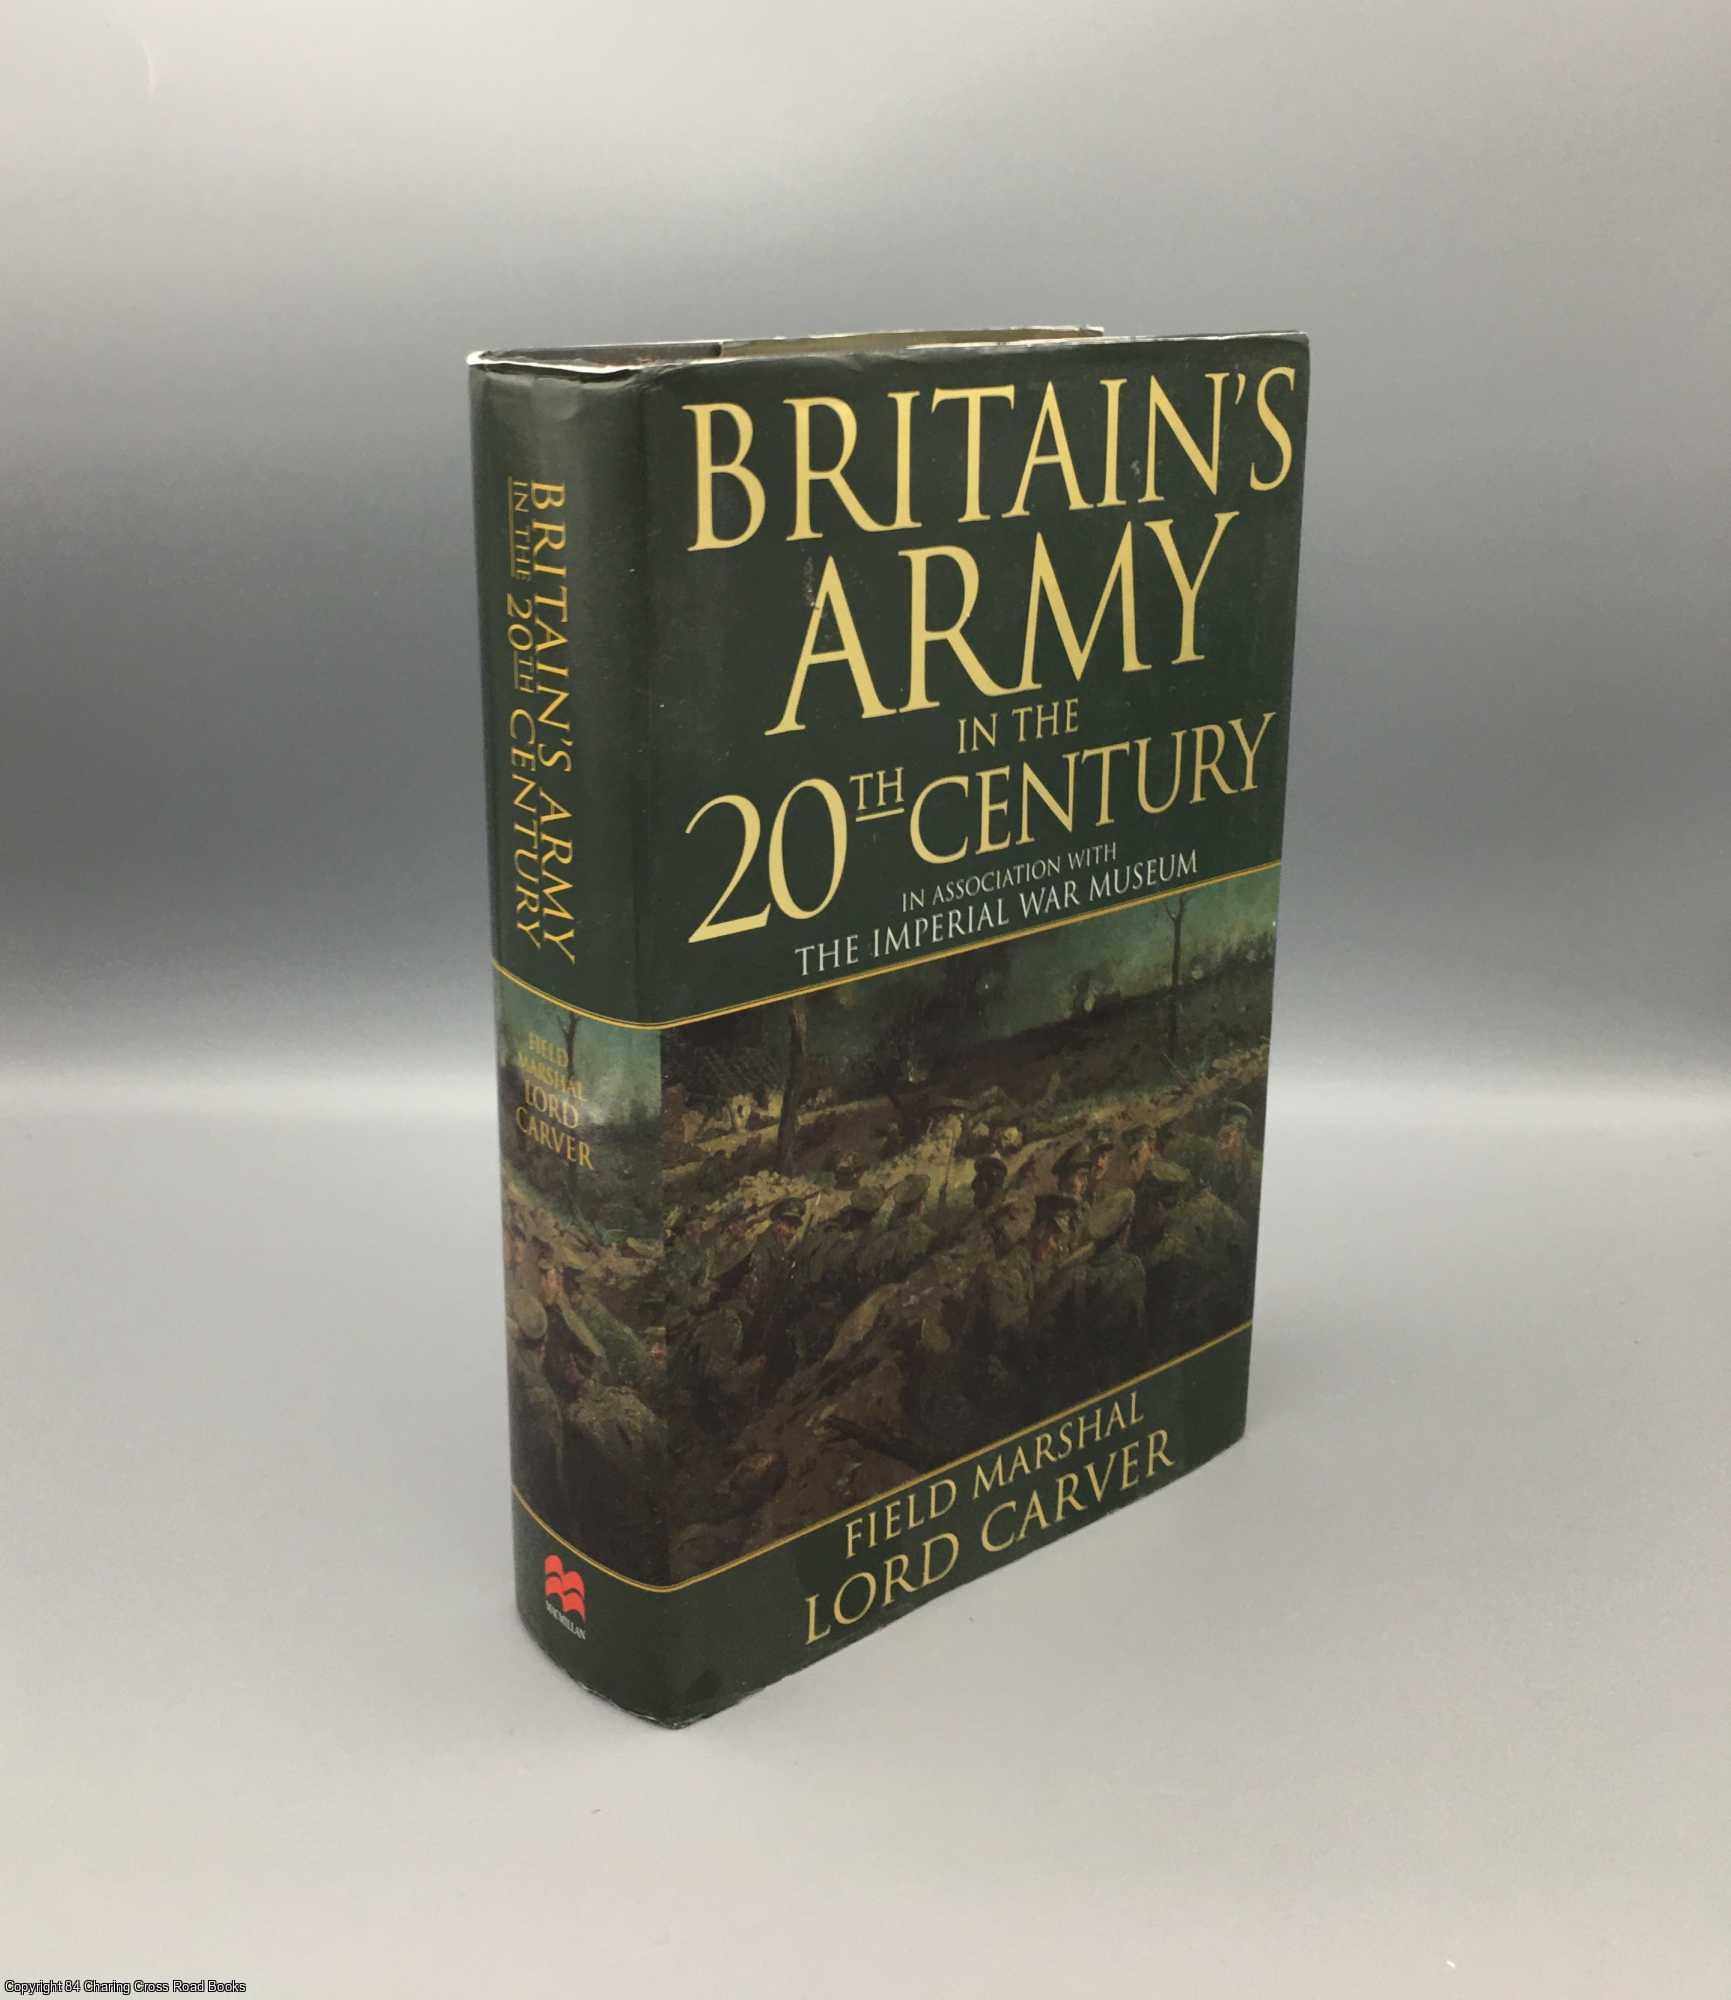 Michael Carver - Britain's Army in the 20th Century